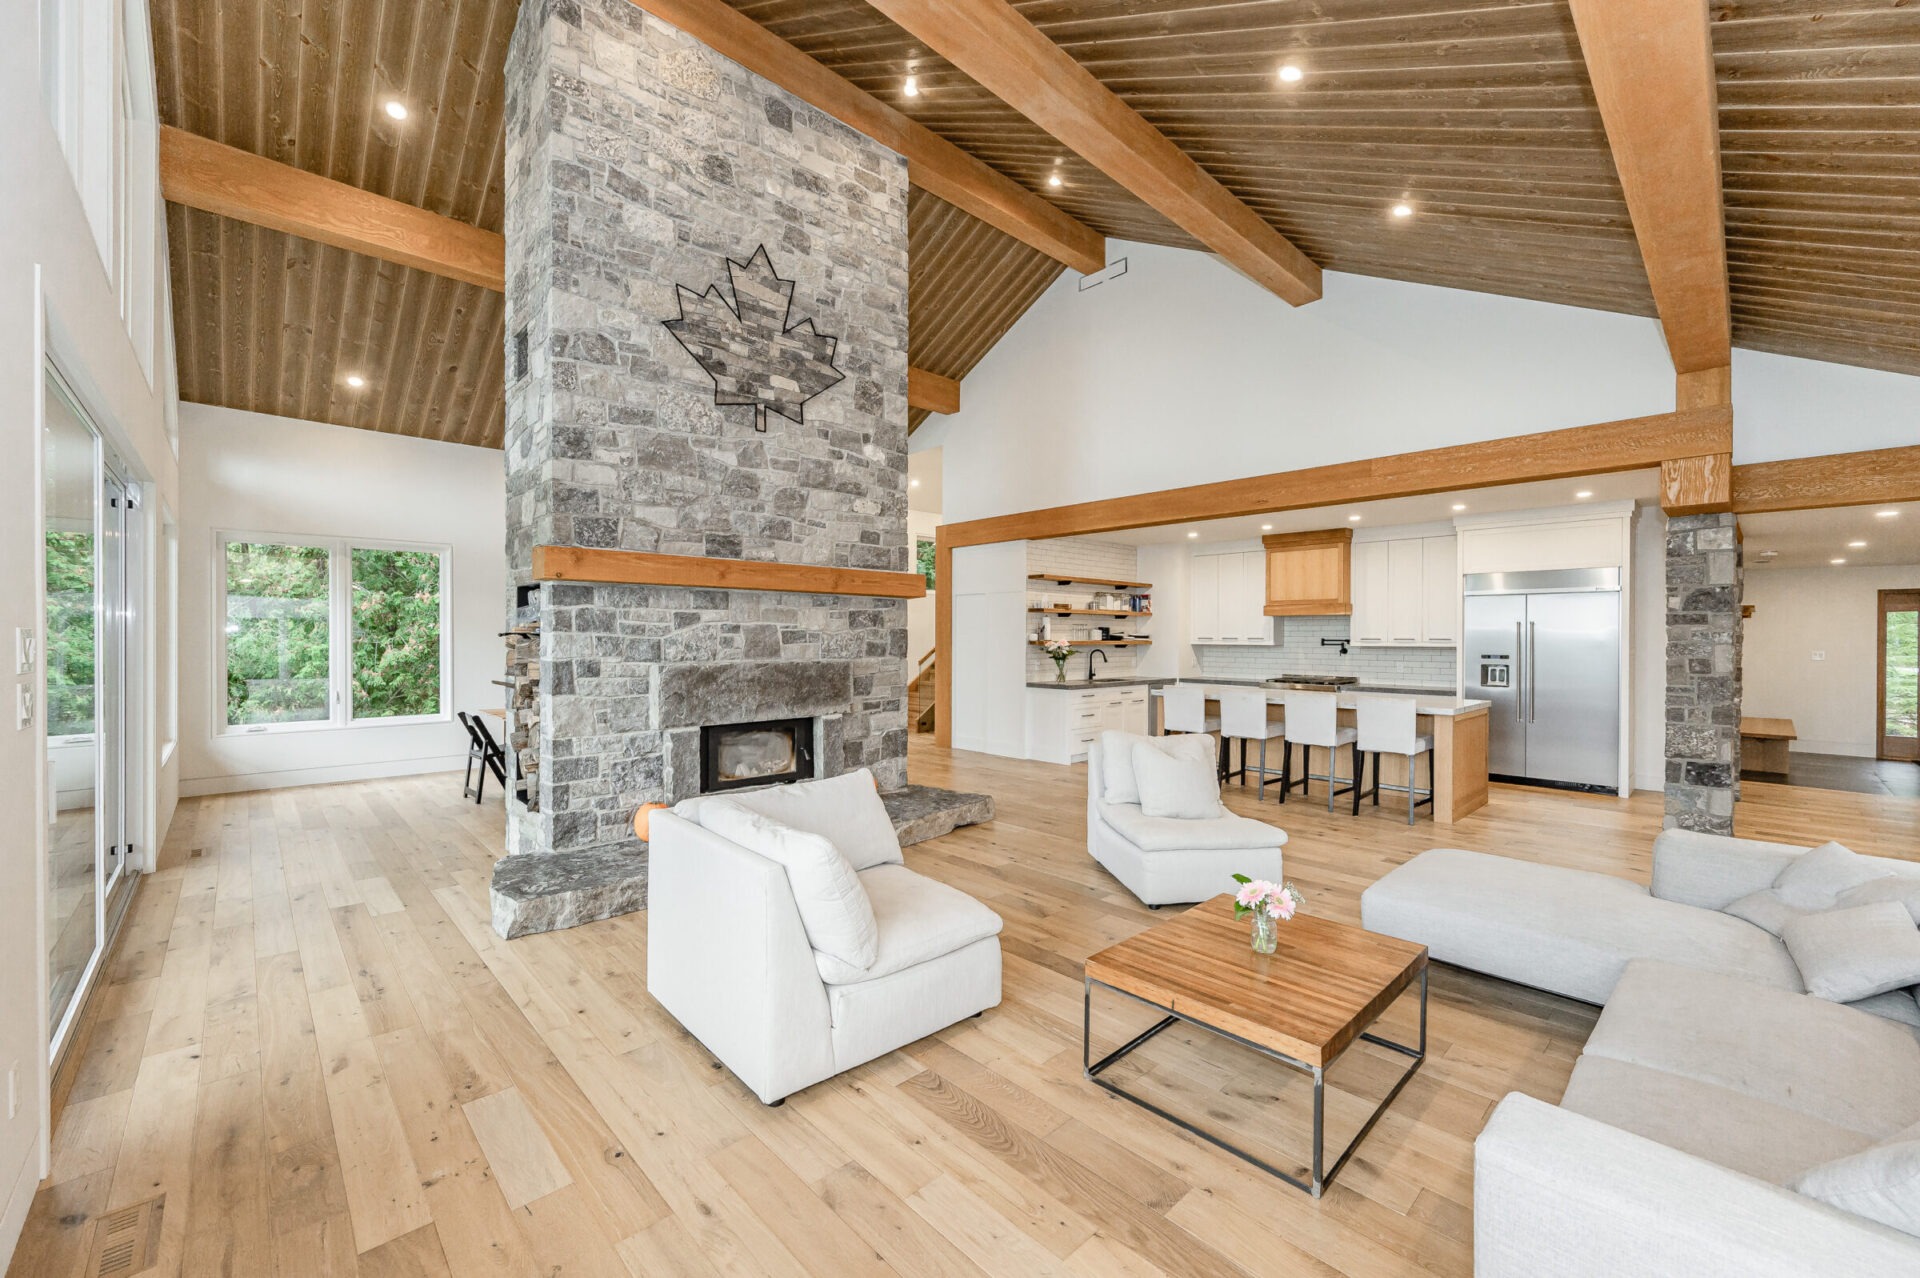 A spacious, modern living room with high ceilings, wooden beams, stone fireplace, open kitchen, hardwood floors, and contemporary furniture. Bright and airy ambience.